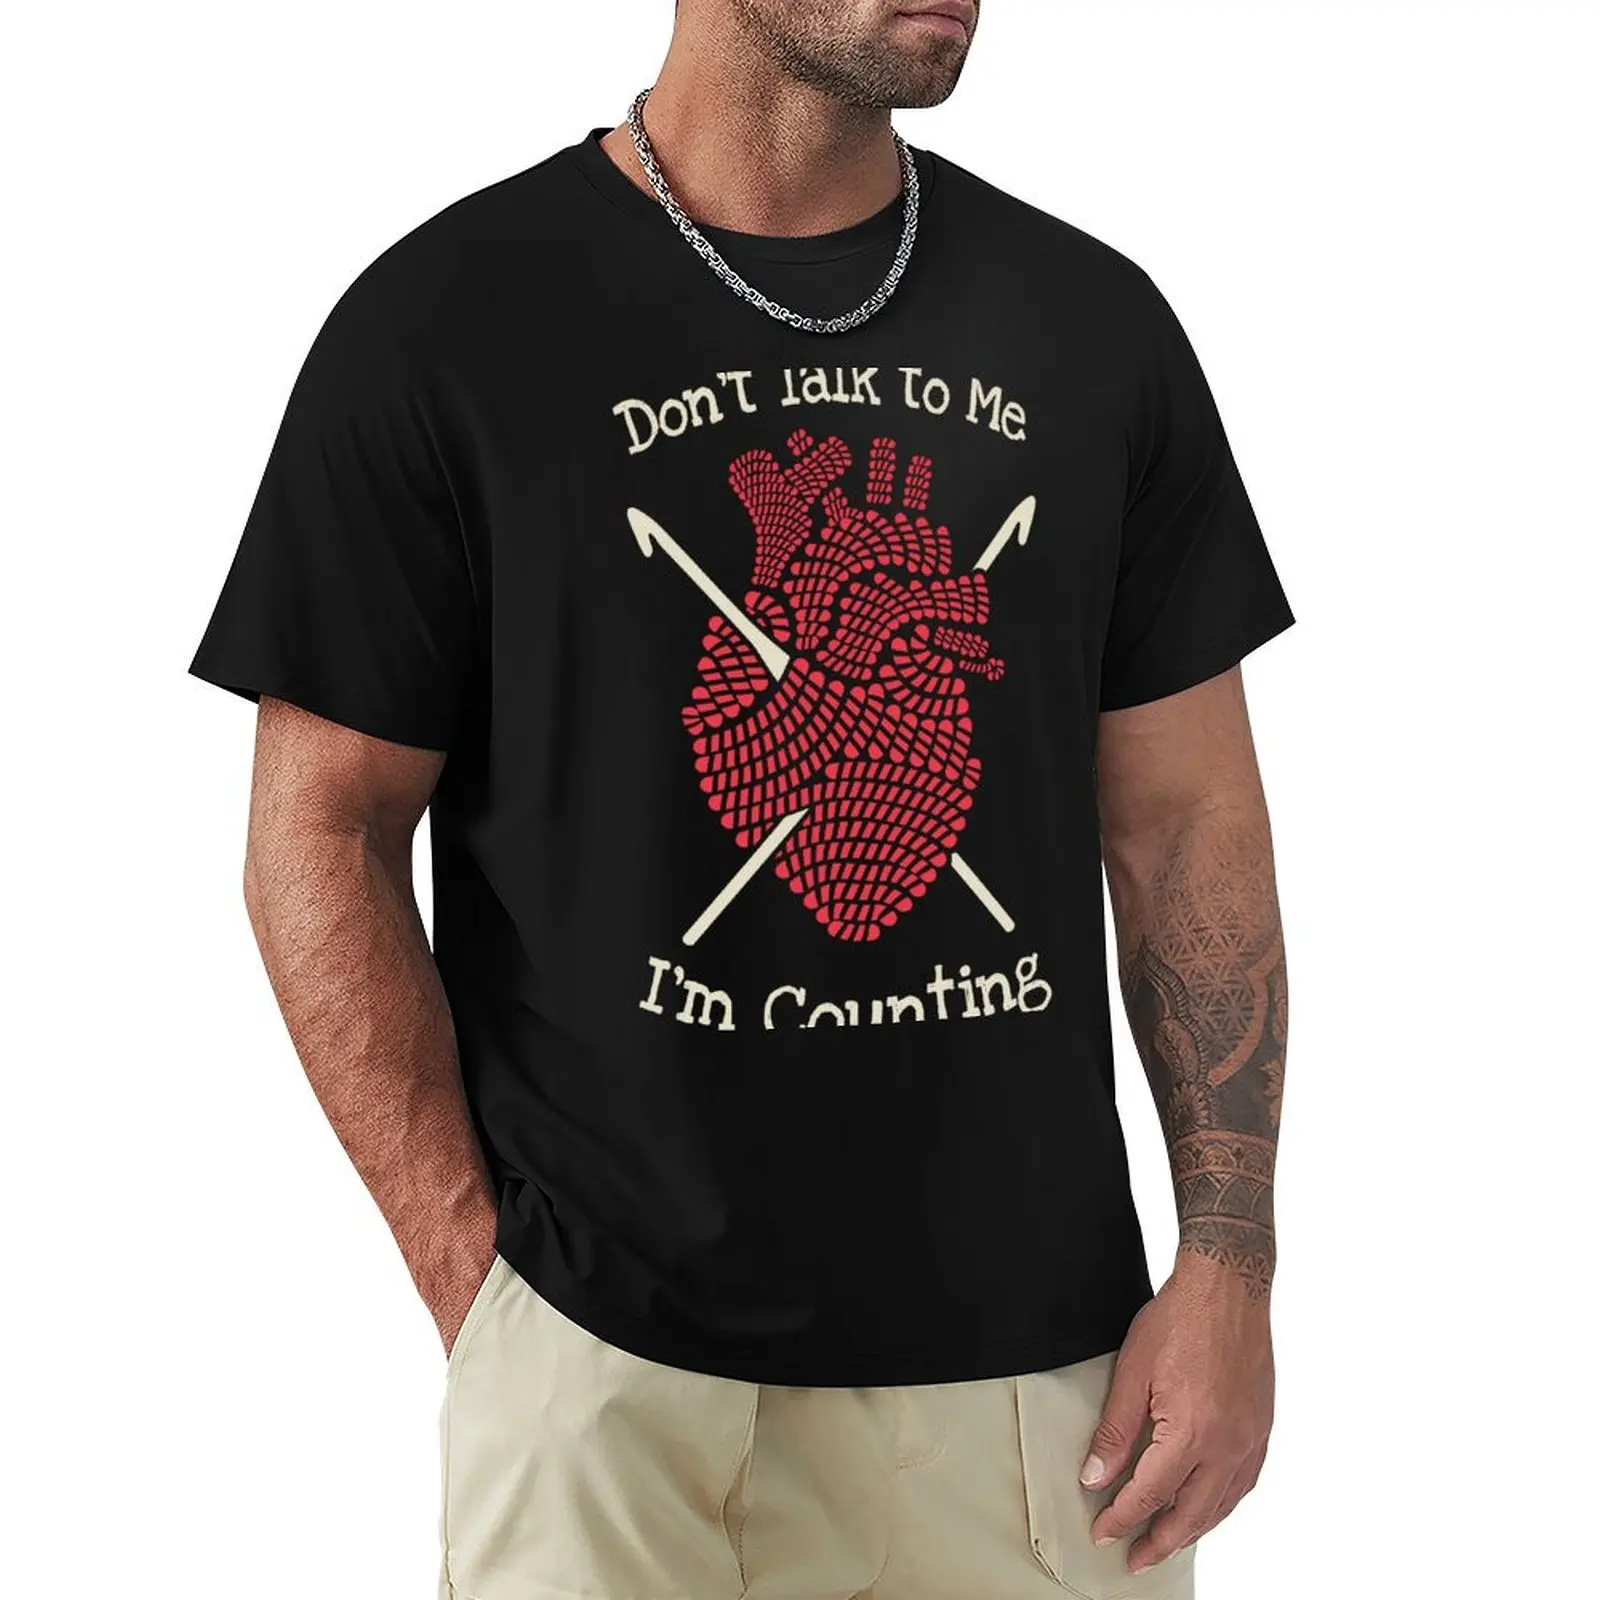 

Don't Talk To Me I'm Counting Funny Crochet Anatomical Heart T-Shirt vintage clothes summer top black t shirts for men